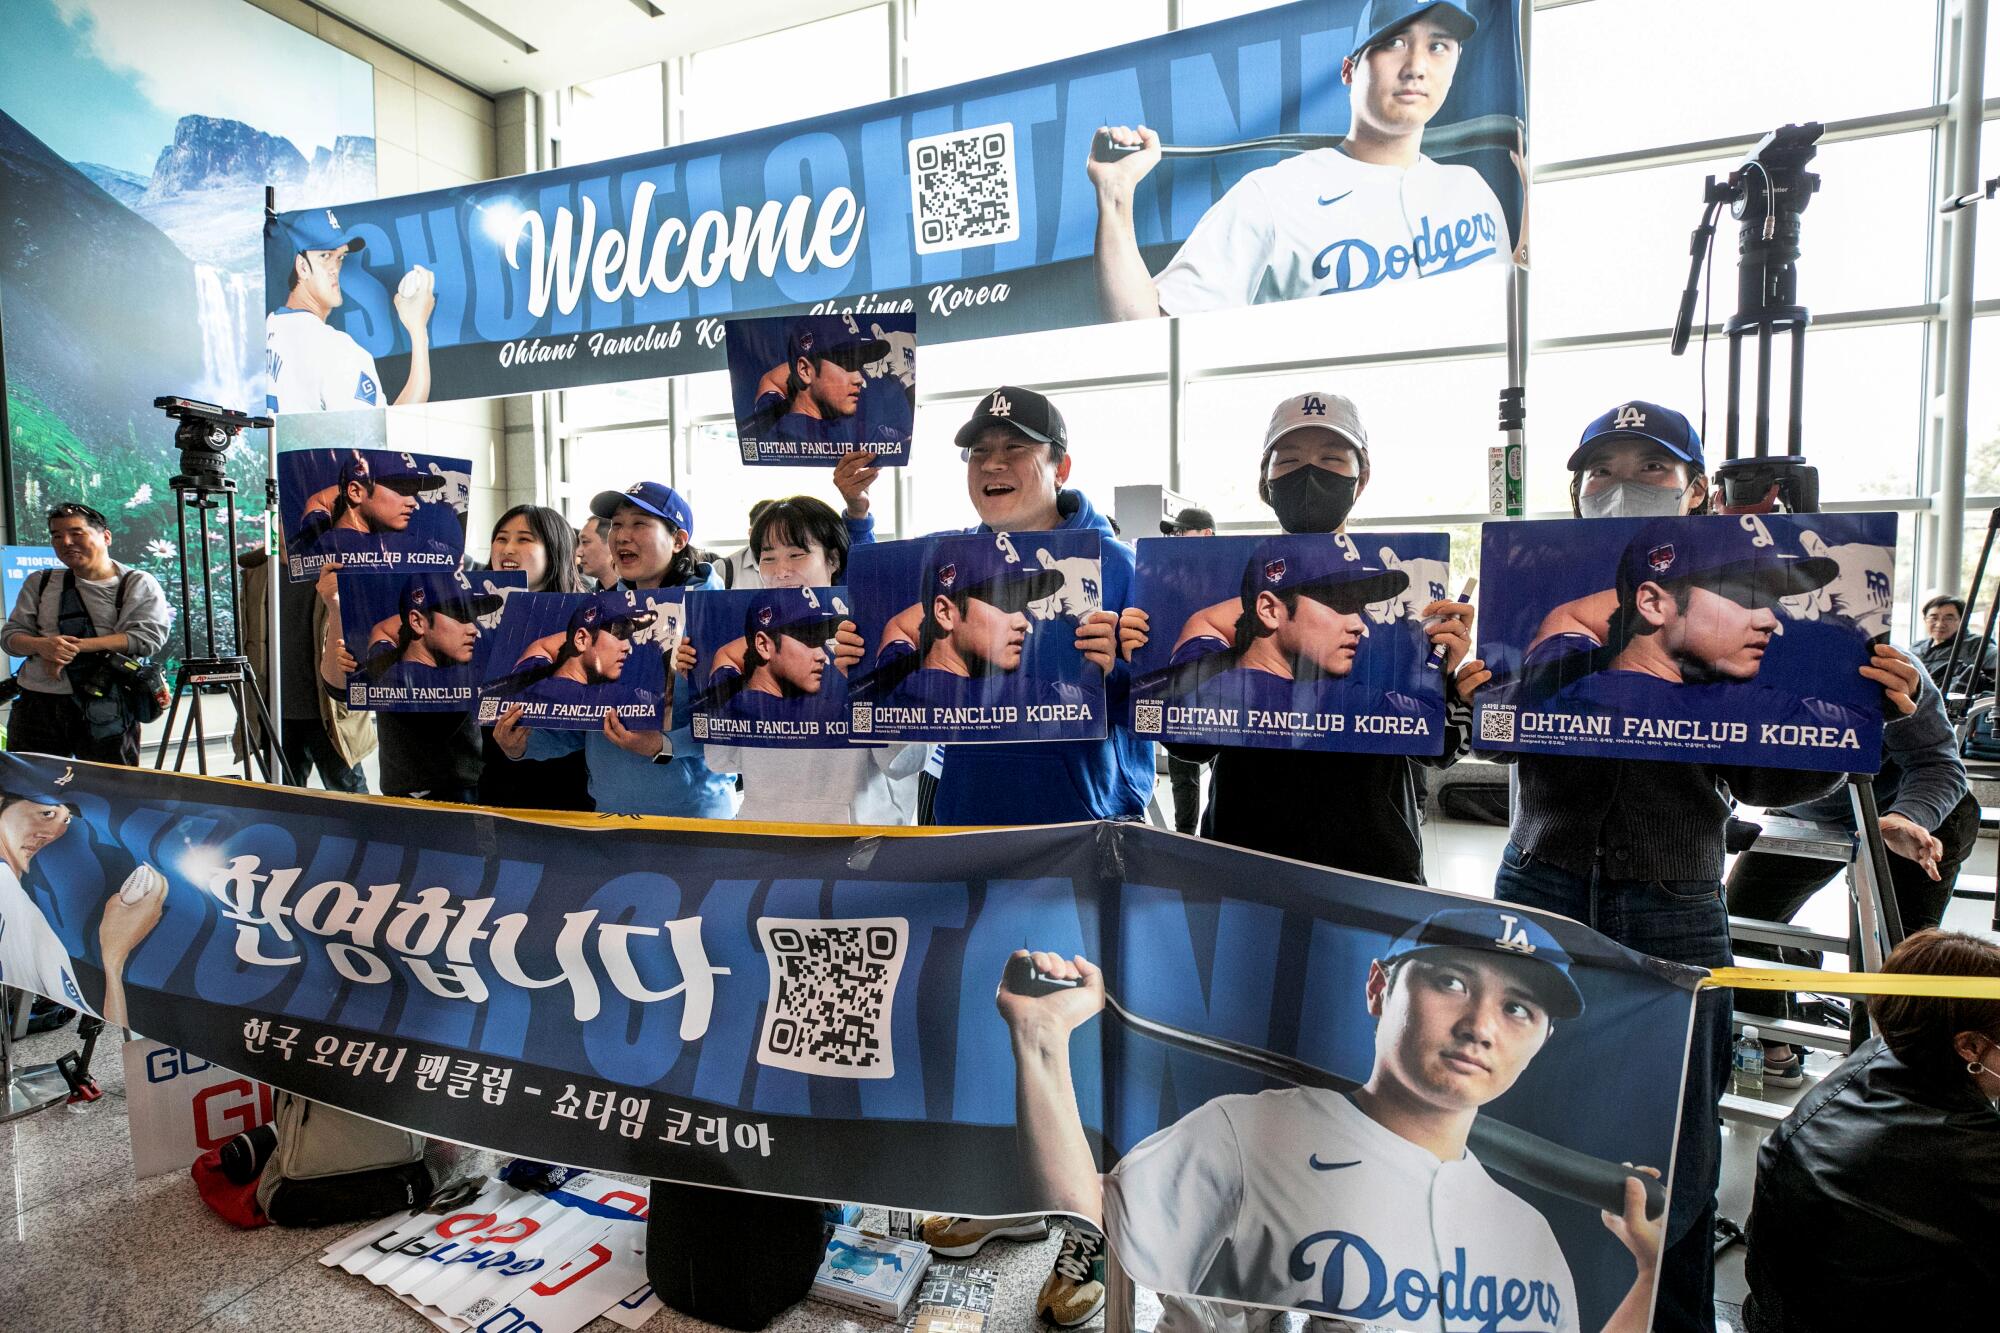 Lee Jae-ik and other Shohei Ohtani fans line up with banners at an airport.